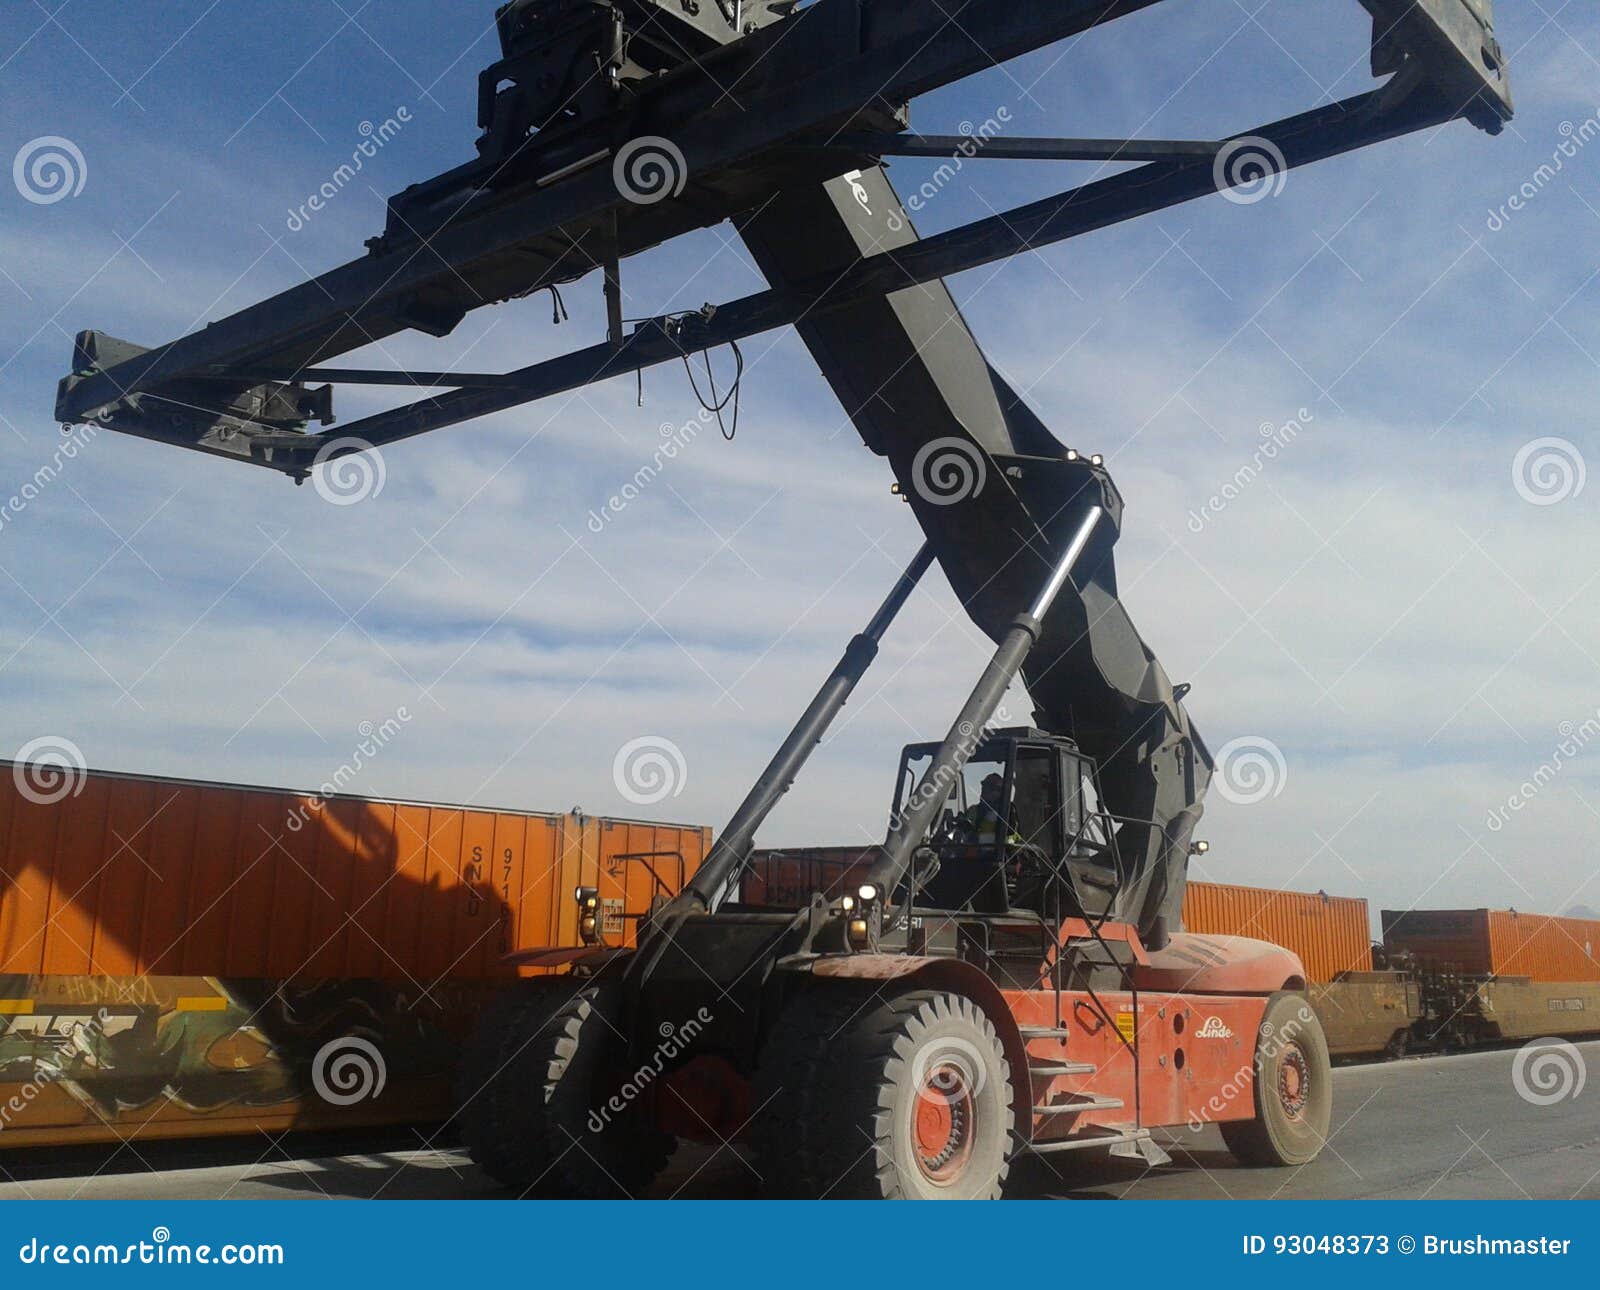 container lifter